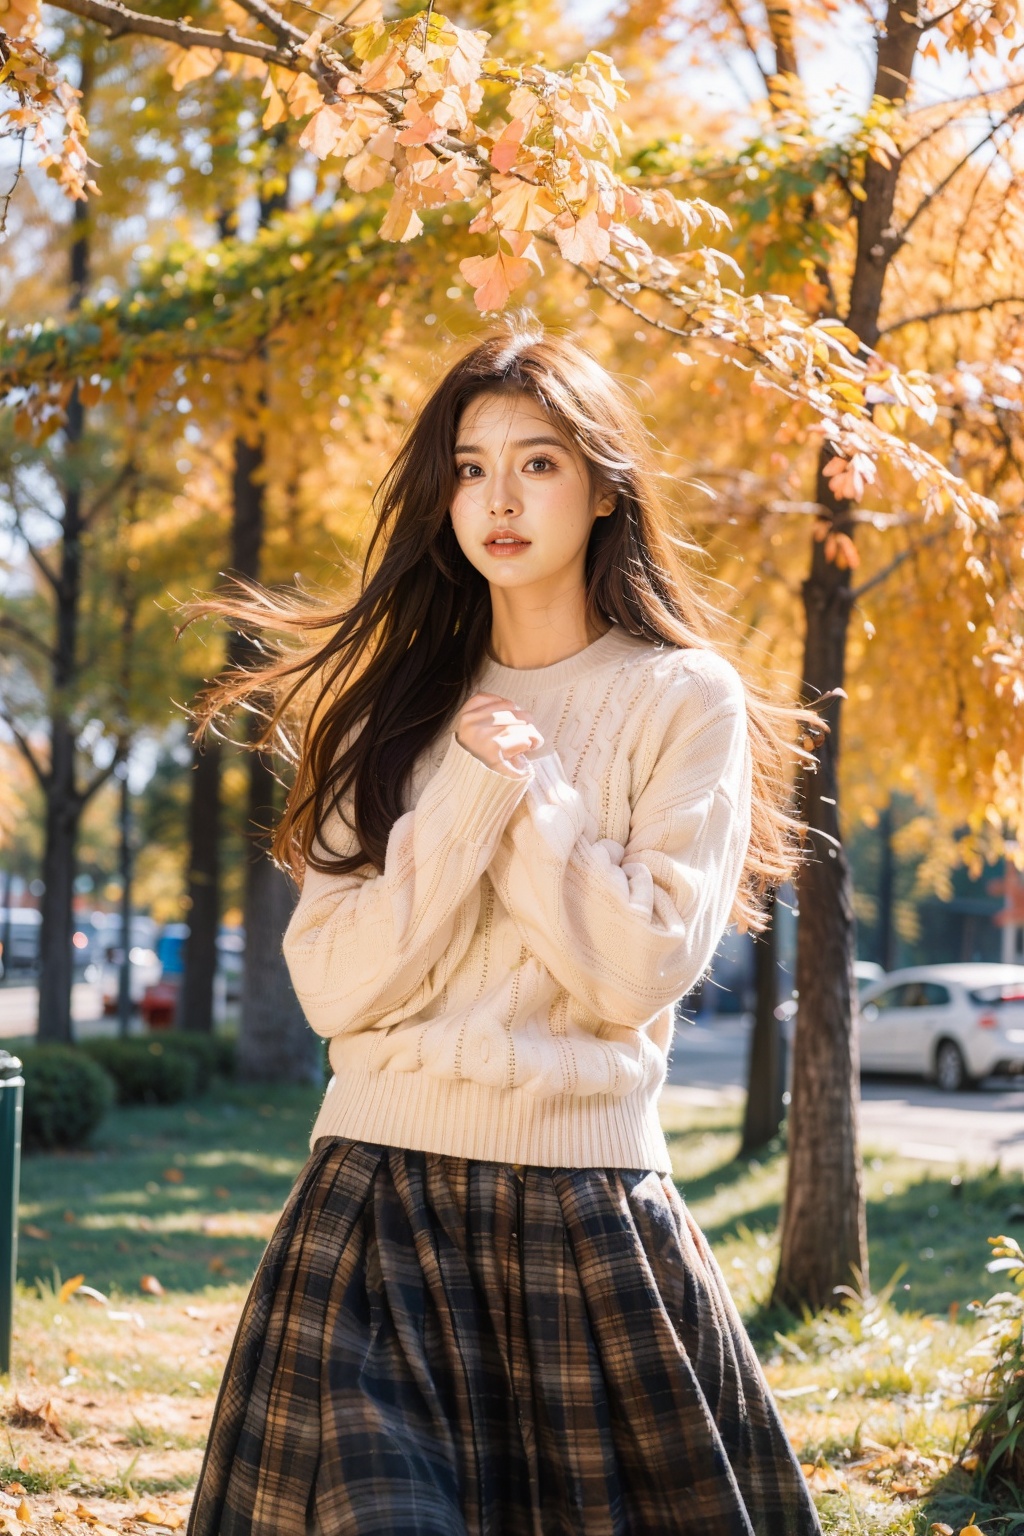 A girl with long hair, waist length black flowing hair, flowing long skirt, big eyes, pink lips, pink cheeks, red lips. Sweater, standing alone in the autumn wind. Everywhere around were dancing ginkgo leaves. Falling leaves, this is a scene of autumn, giving people a sense of tranquility and slightly melancholy. Long hair, sweaters, autumn, wind, ginkgo leaves, loneliness, tranquility, melancholy, black movies.